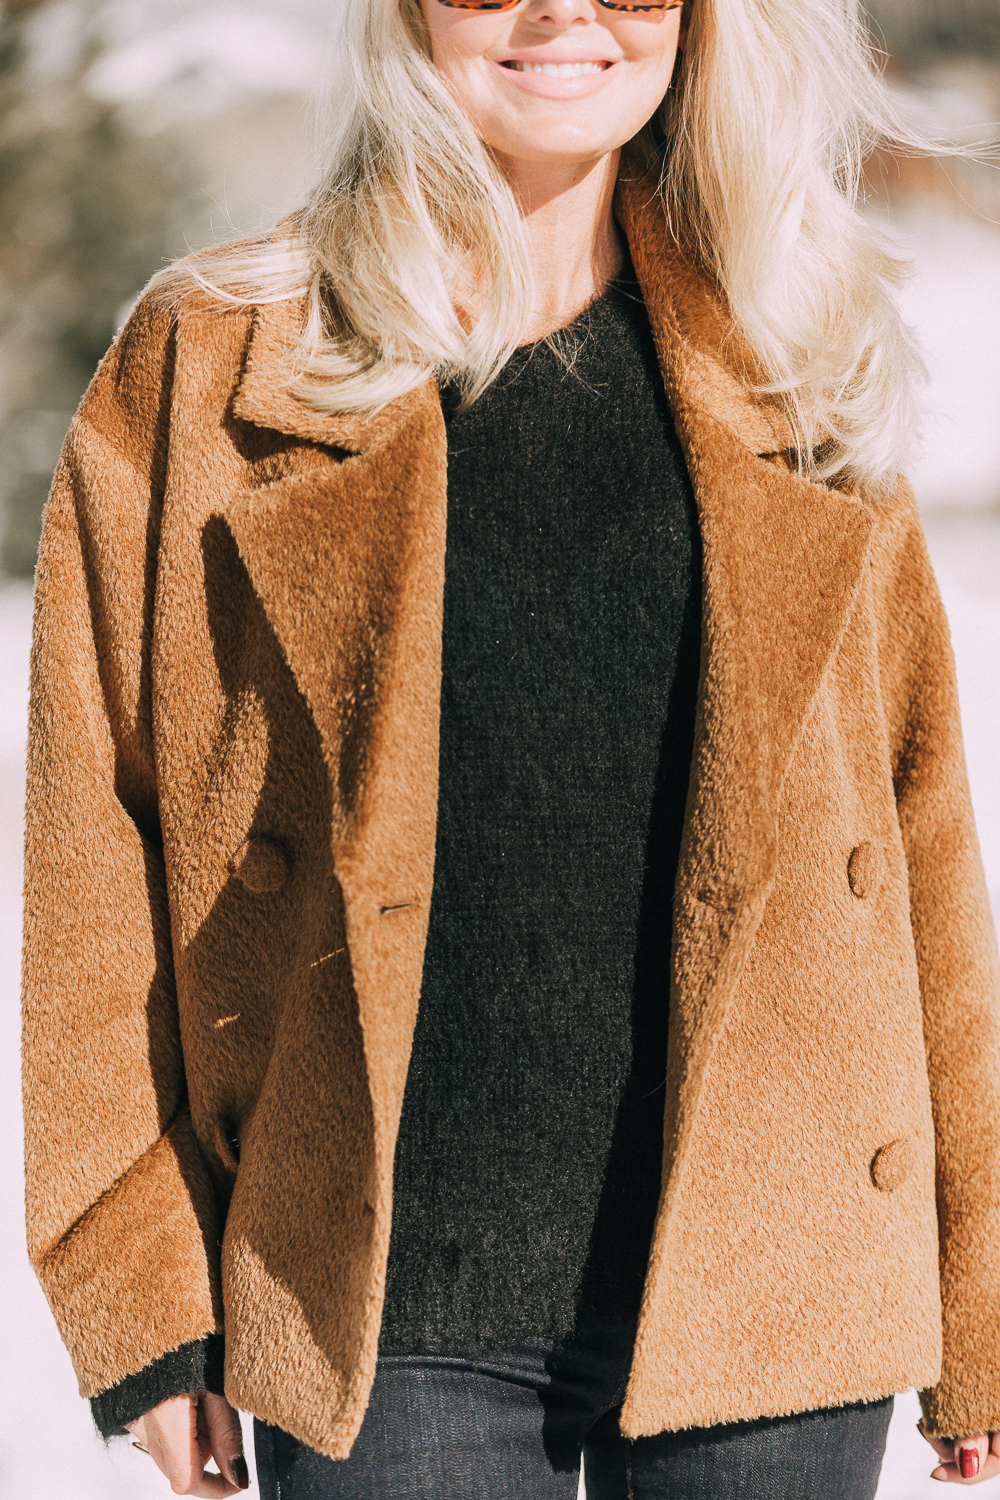 Great Fabrics make a big difference and make you feel great and this designer, Eileen Fisher, understands that featuring a brown fuzzy faux fur jacket, fuzzy black sweater, dark wash slimming jeans and western inspired booties on blonde fashion blogger over 40 in the snowy mountains